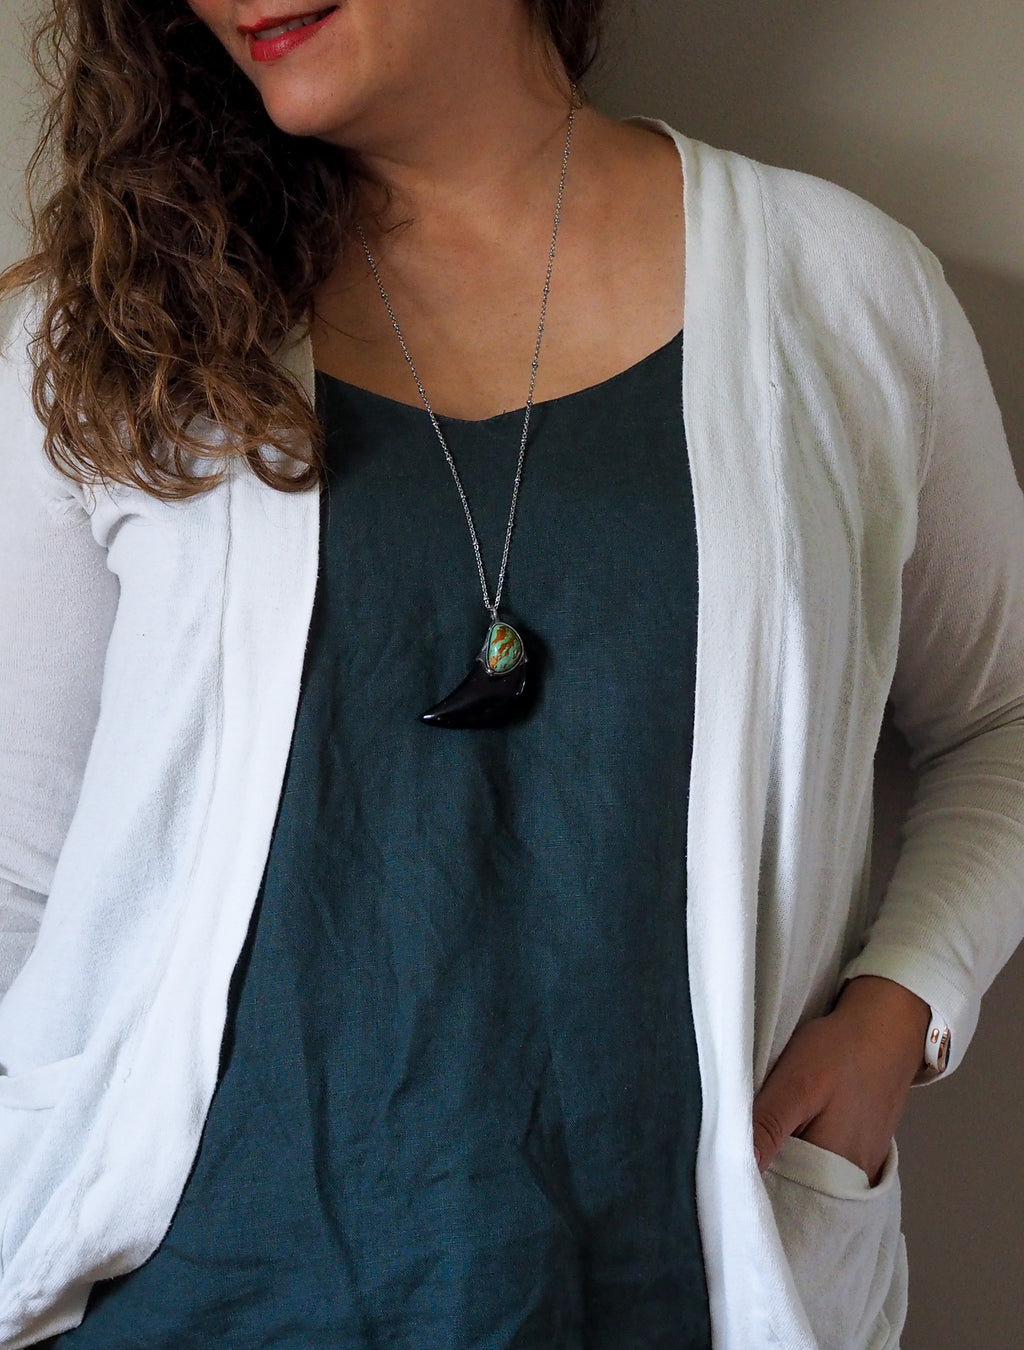 black and blue healing crystal talisman necklace on woman in blue top